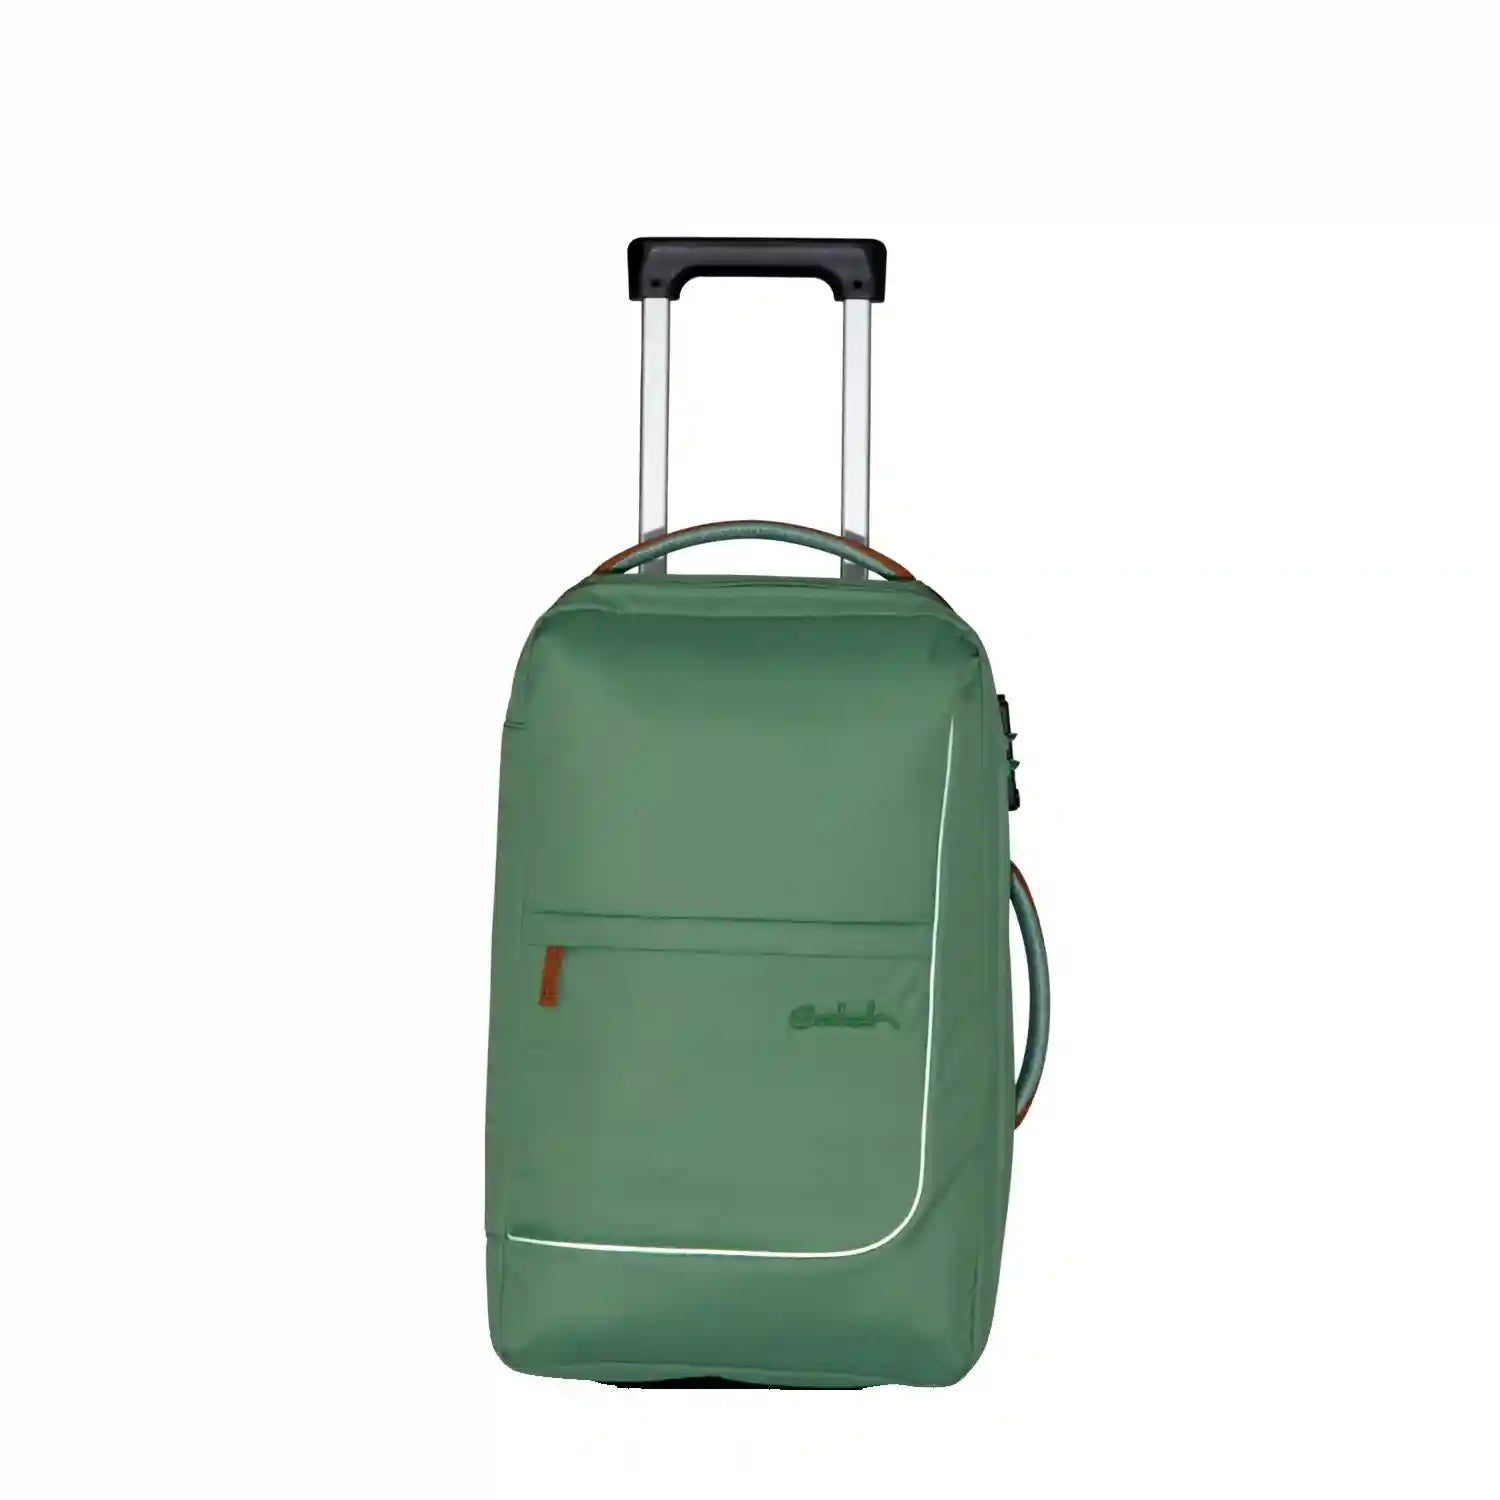 Satch Flow S Kindertrolley 54 cm - Pure Jade Green